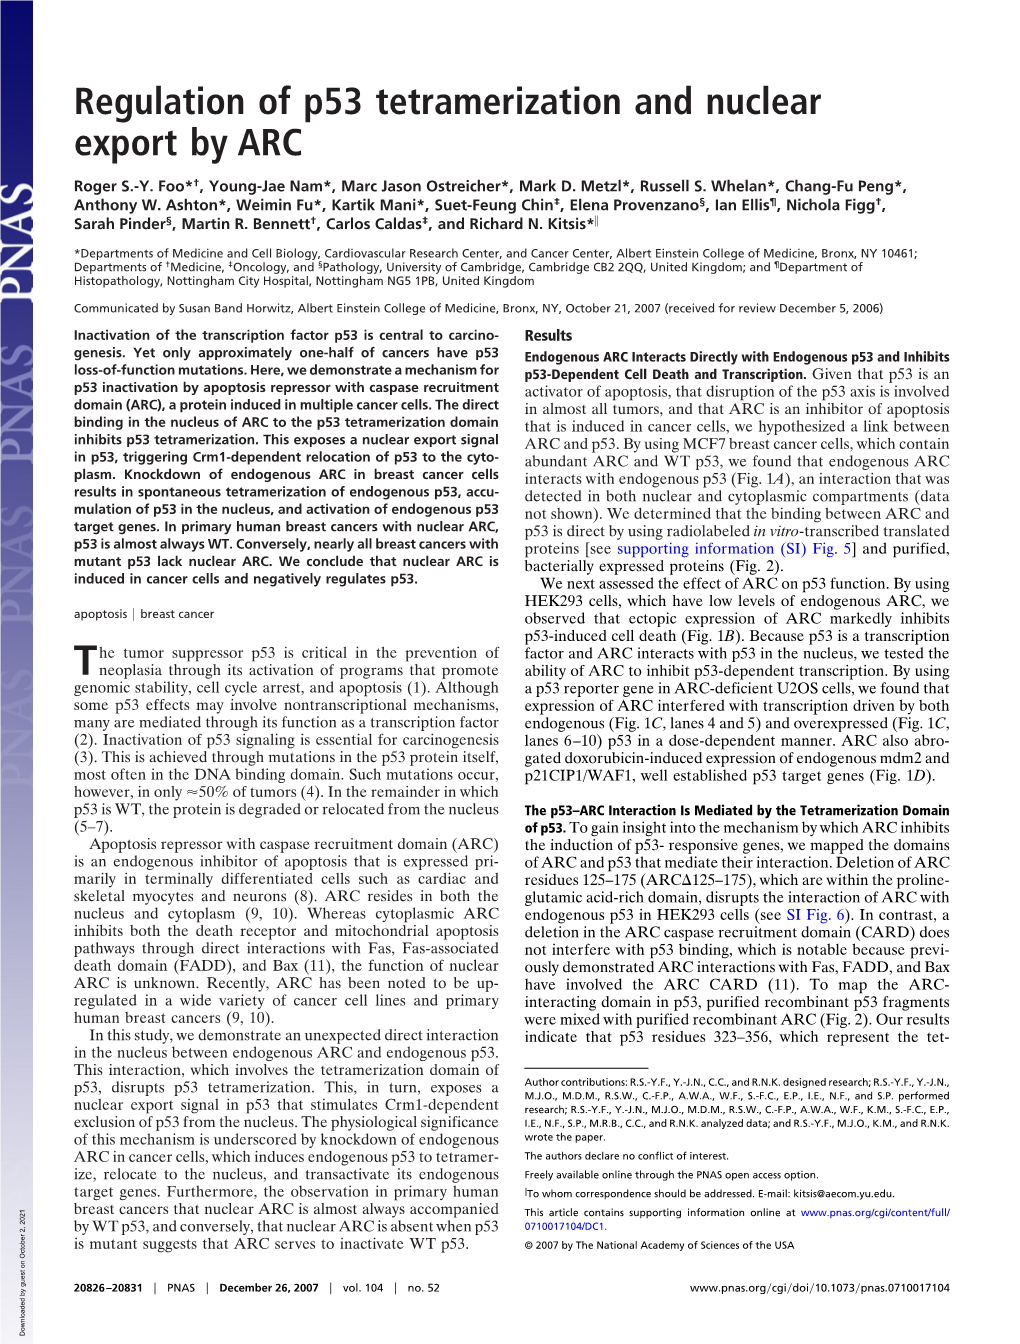 Regulation of P53 Tetramerization and Nuclear Export by ARC